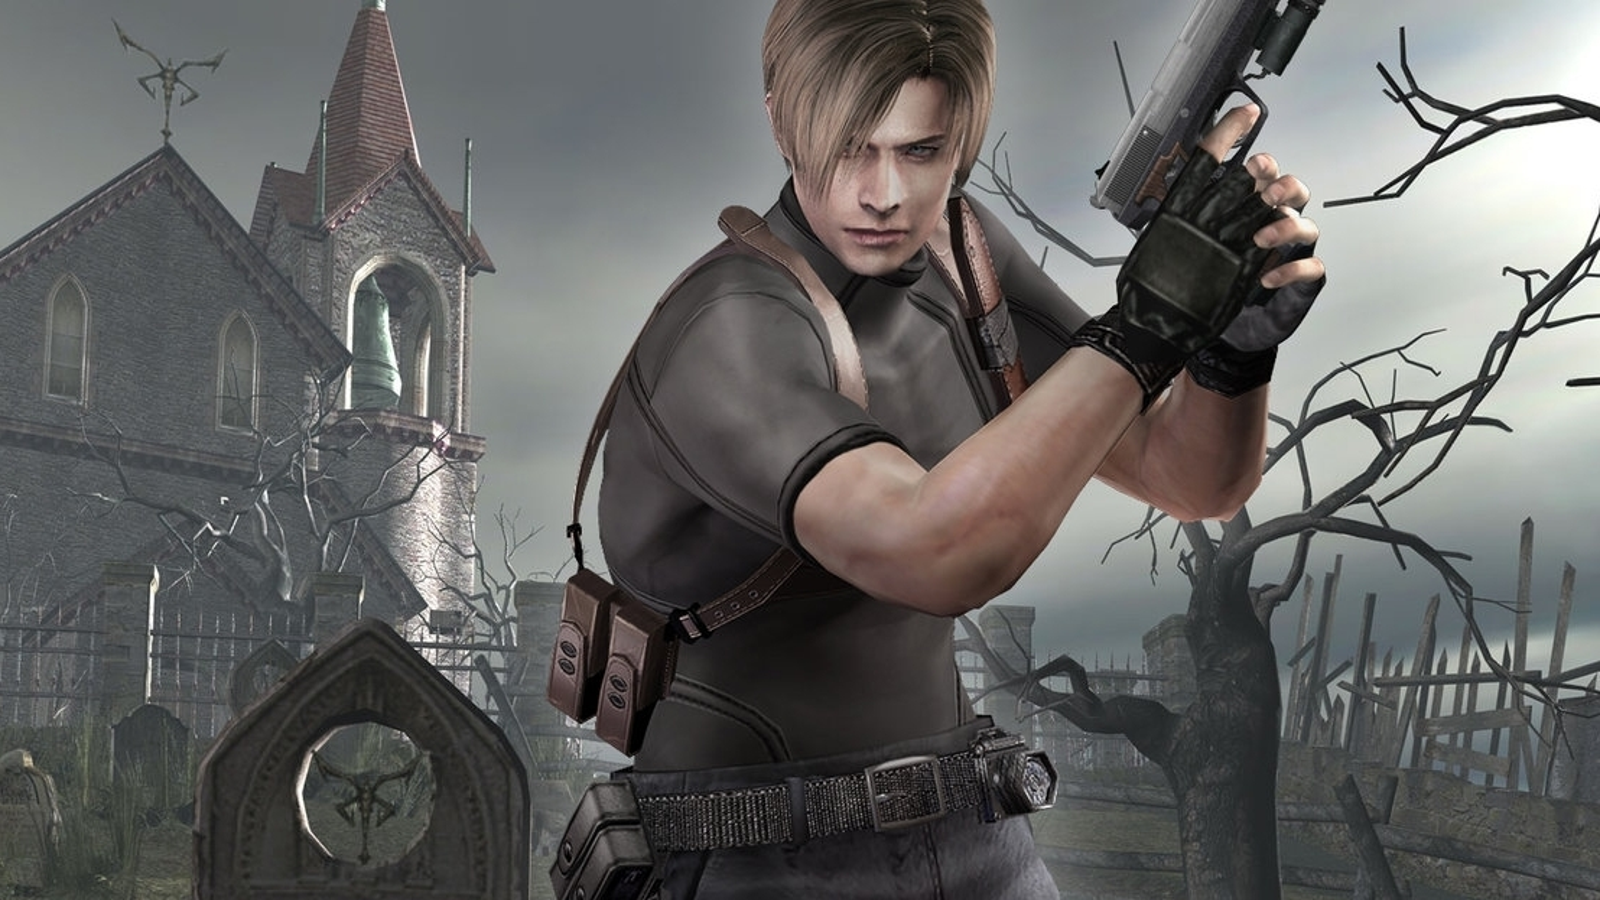 Resident Evil 4 sent the series on a downward spiral from which